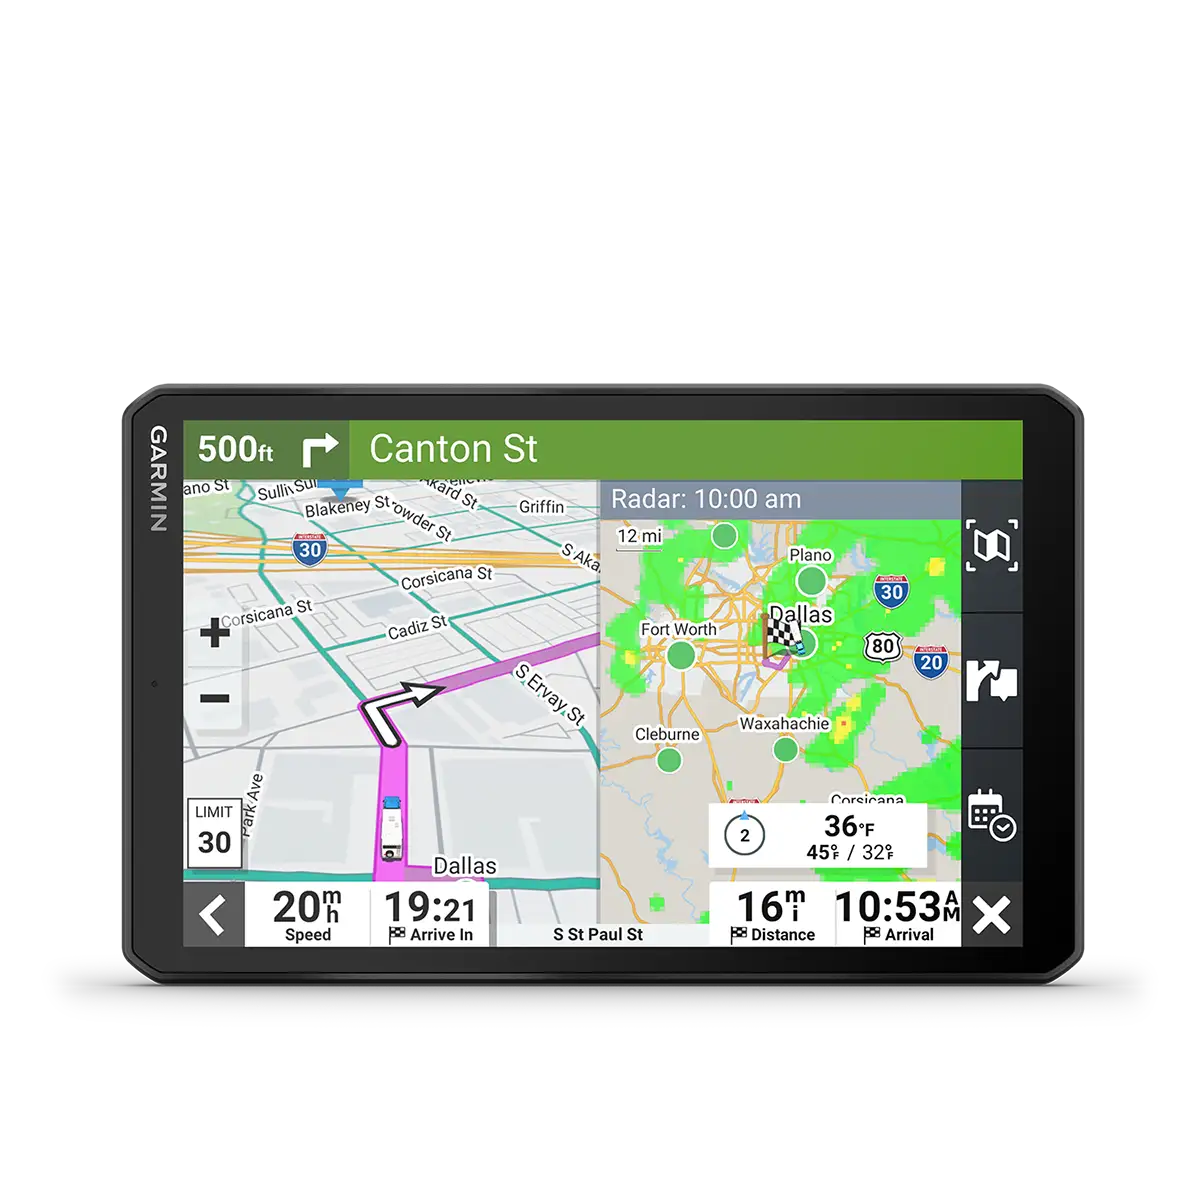 Garmin RV 895 with directions info